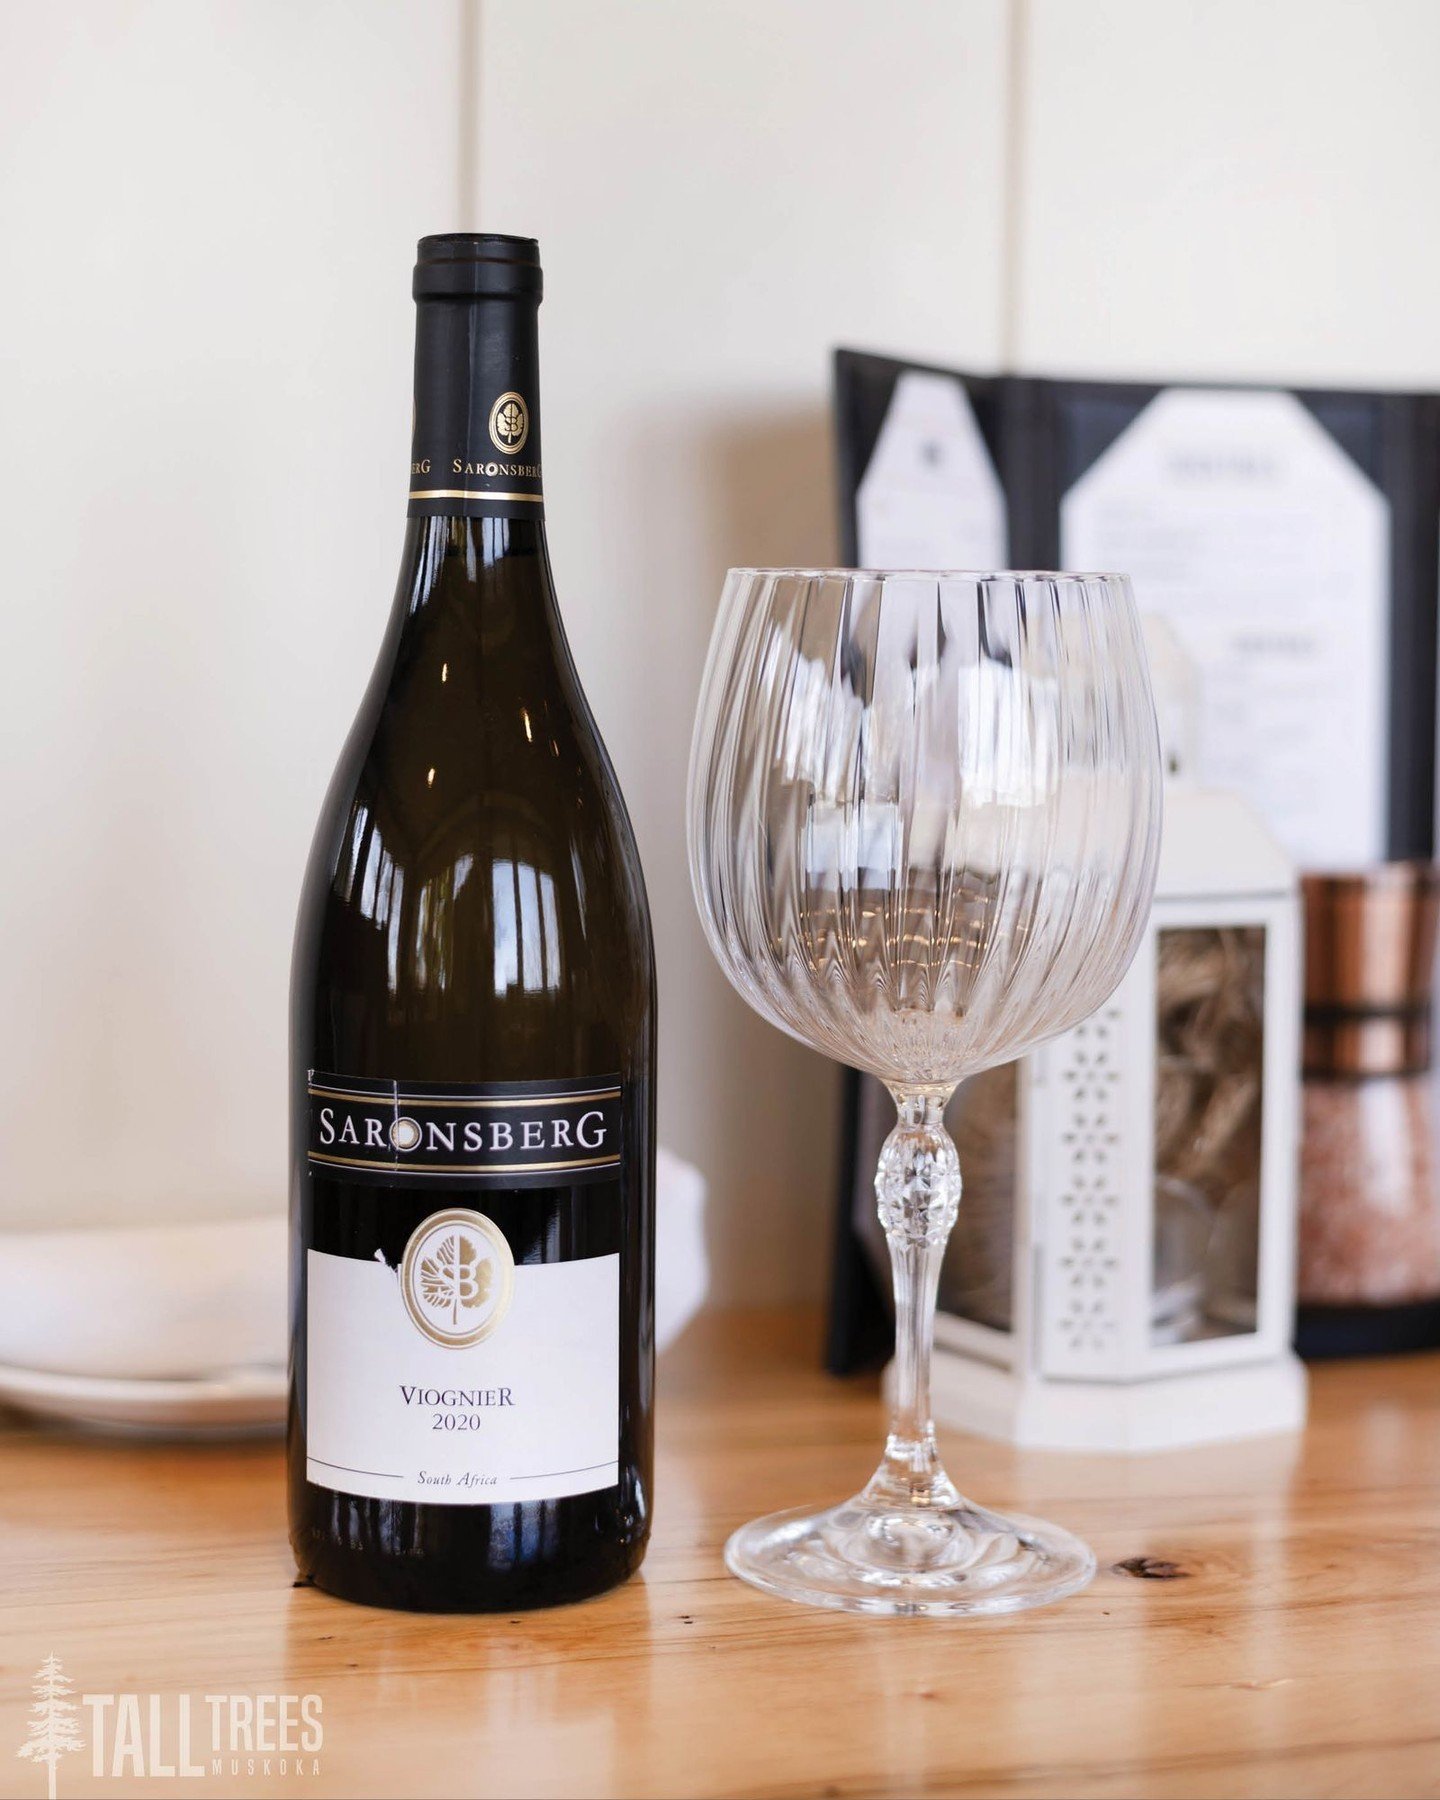 This South African viognier undergoes a meticulous fermentation process to achieve its fresh and varied flavours. The grapes are hand-picked, force-cooled and pressed before settling for 48 hours; Saronsberg winemakers ferment the wine in a French oa